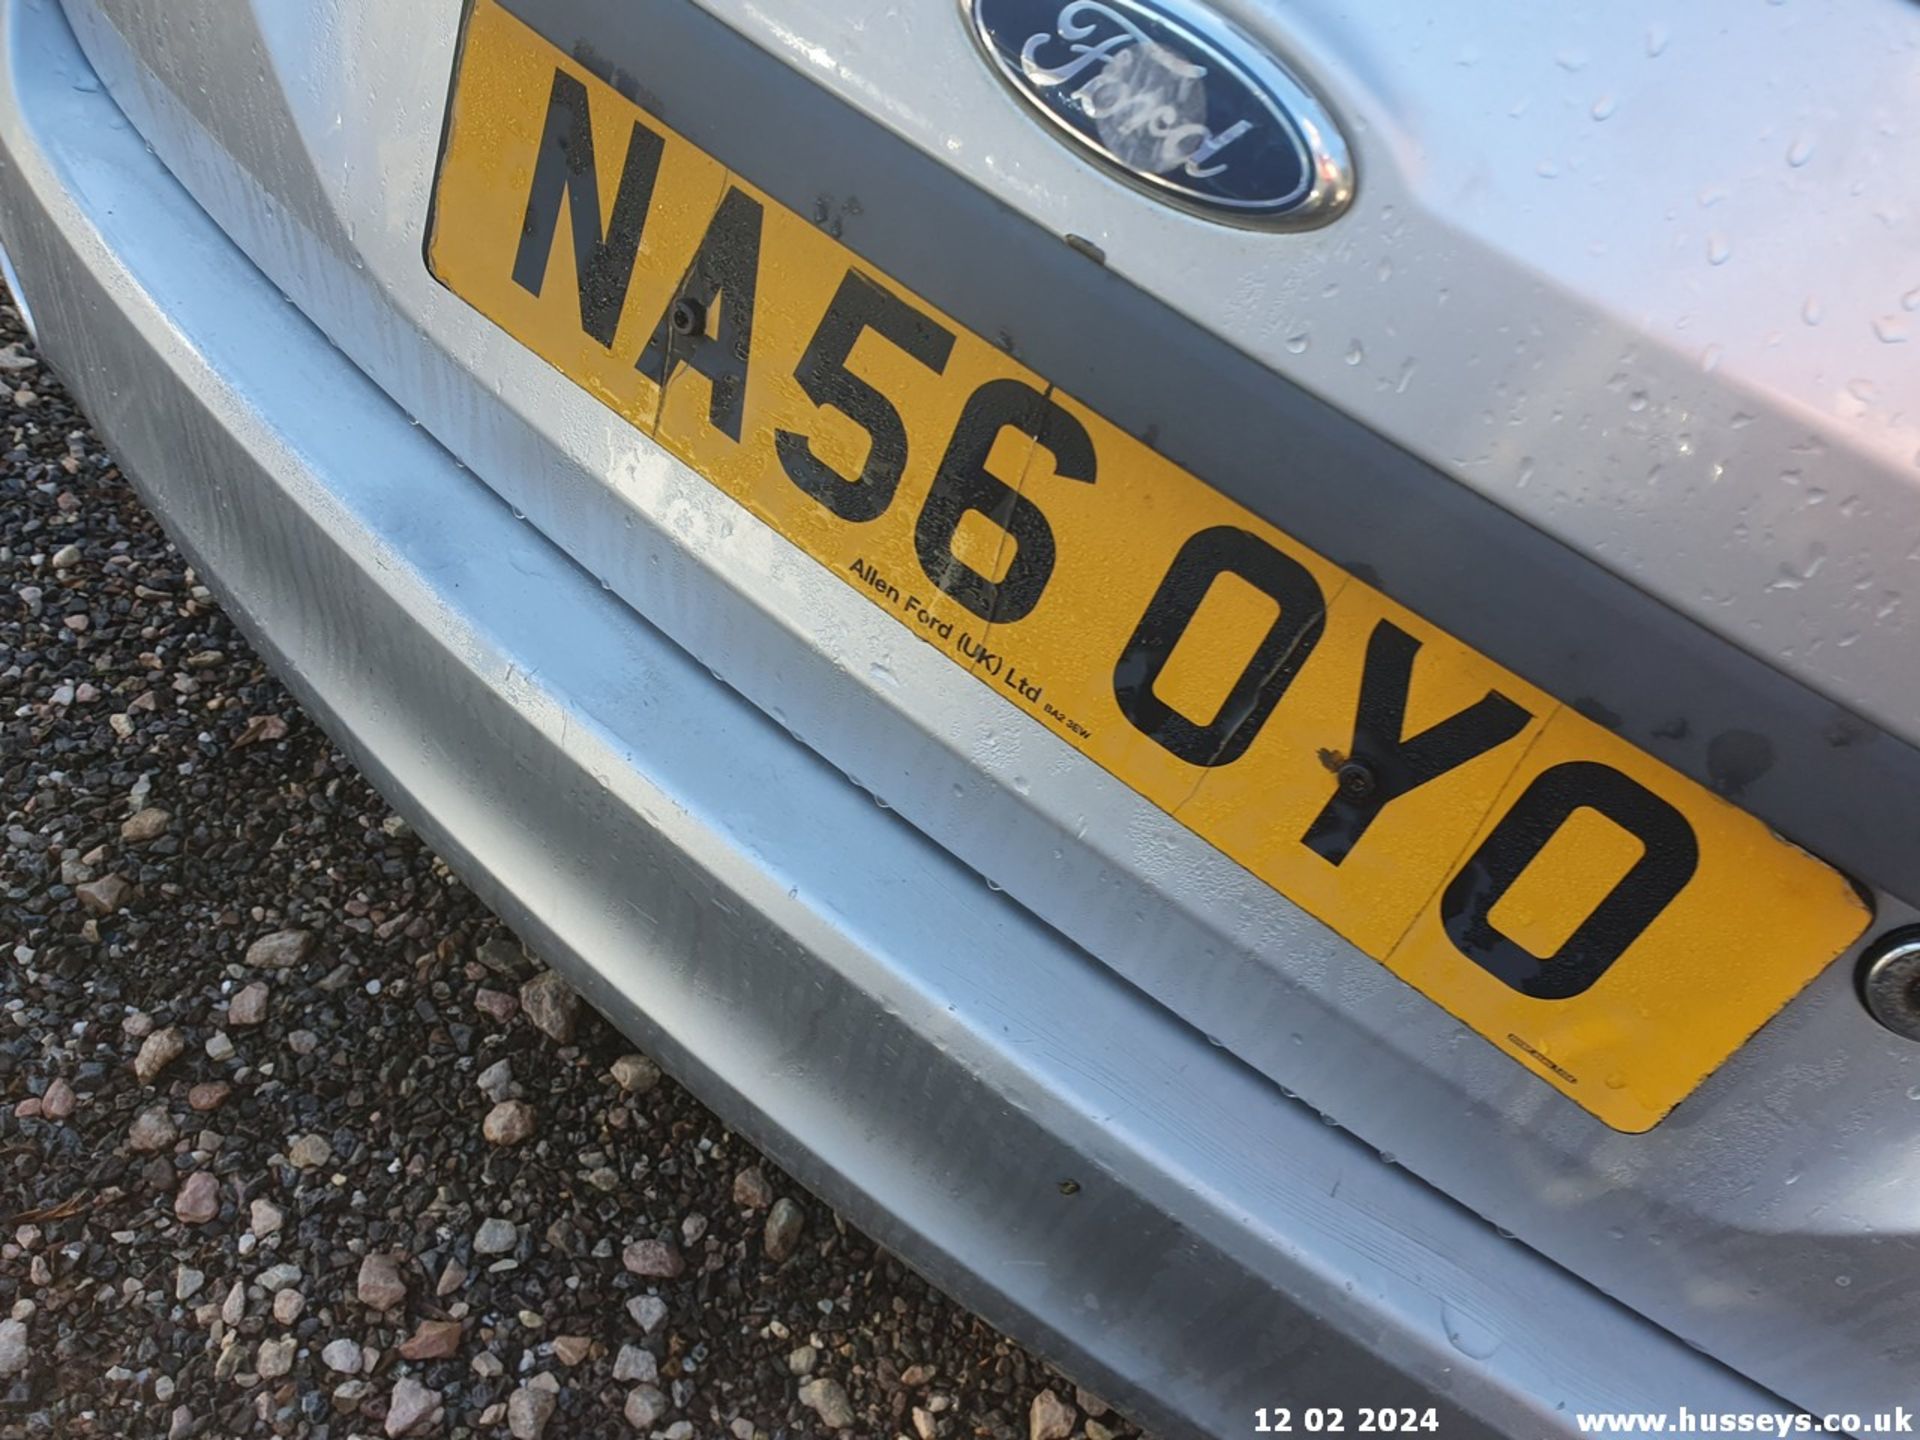 06/56 FORD FIESTA STYLE TDCI - 1399cc 5dr Hatchback (Silver) - Image 35 of 39